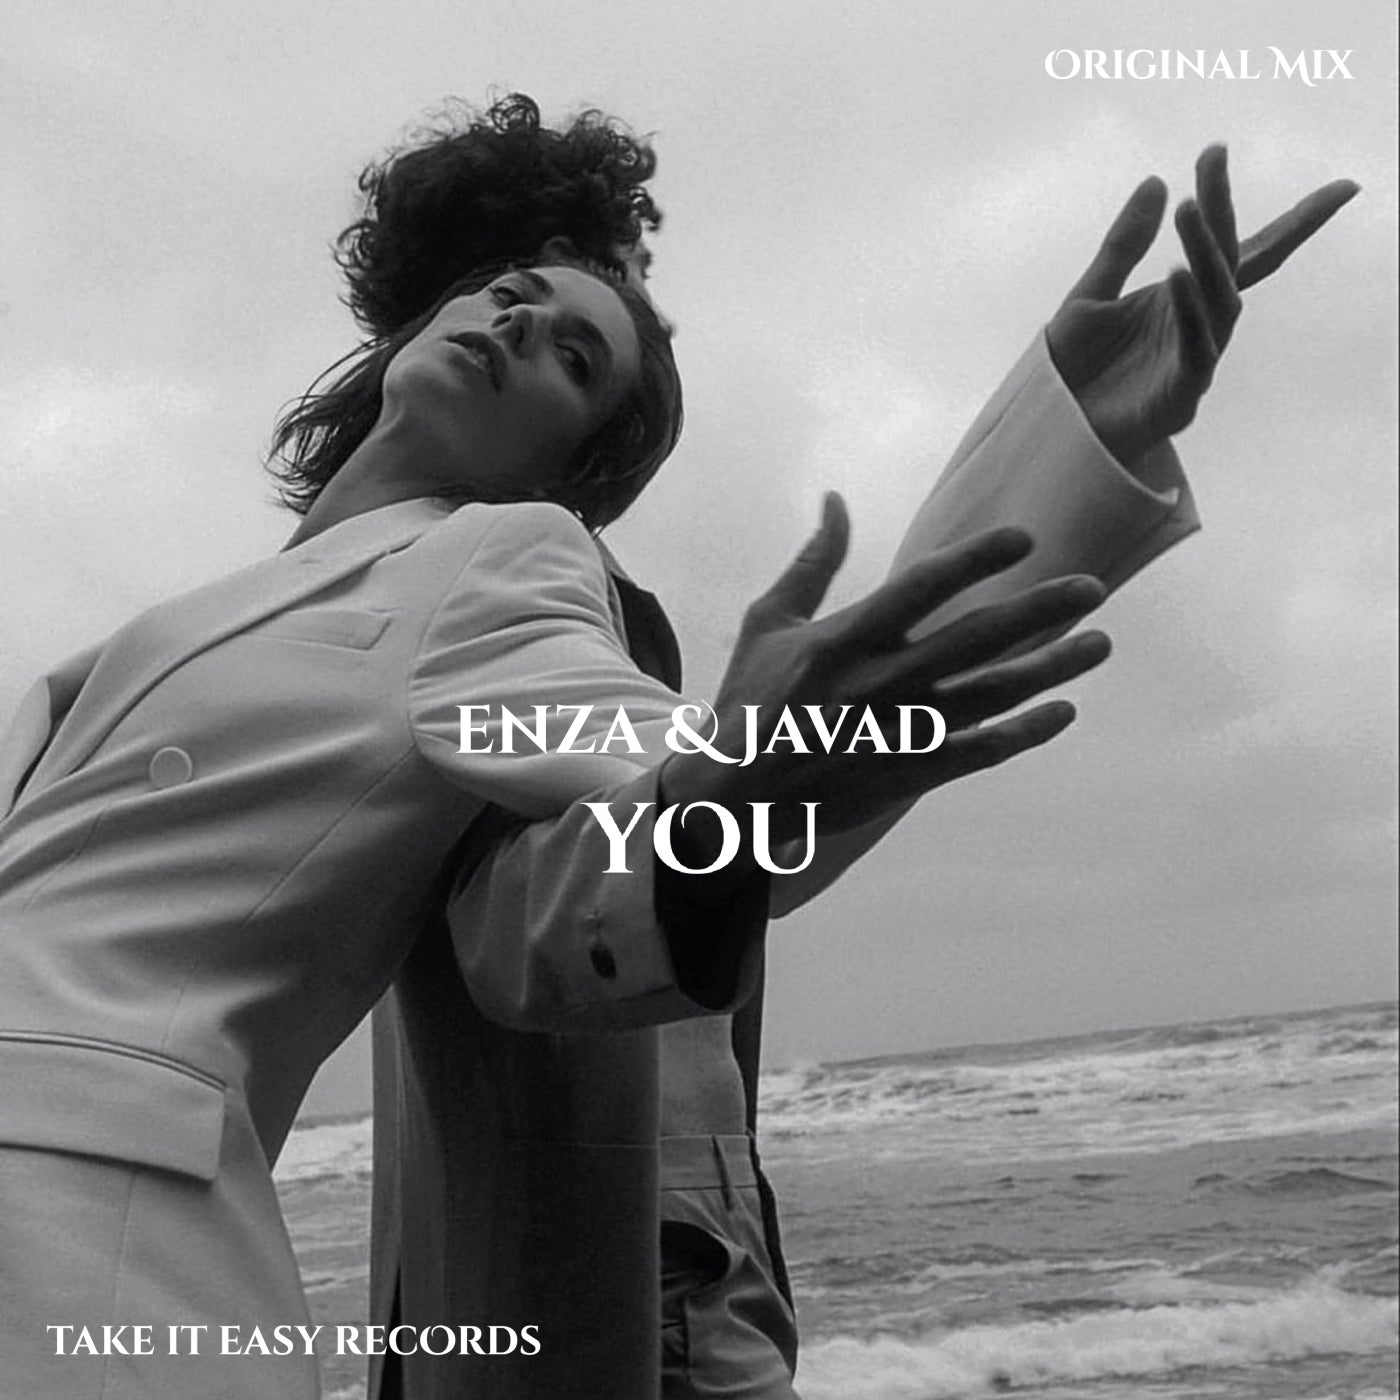 Enza, JAVAD - You [Take It Easy Records] | Music & Downloads on Beatport